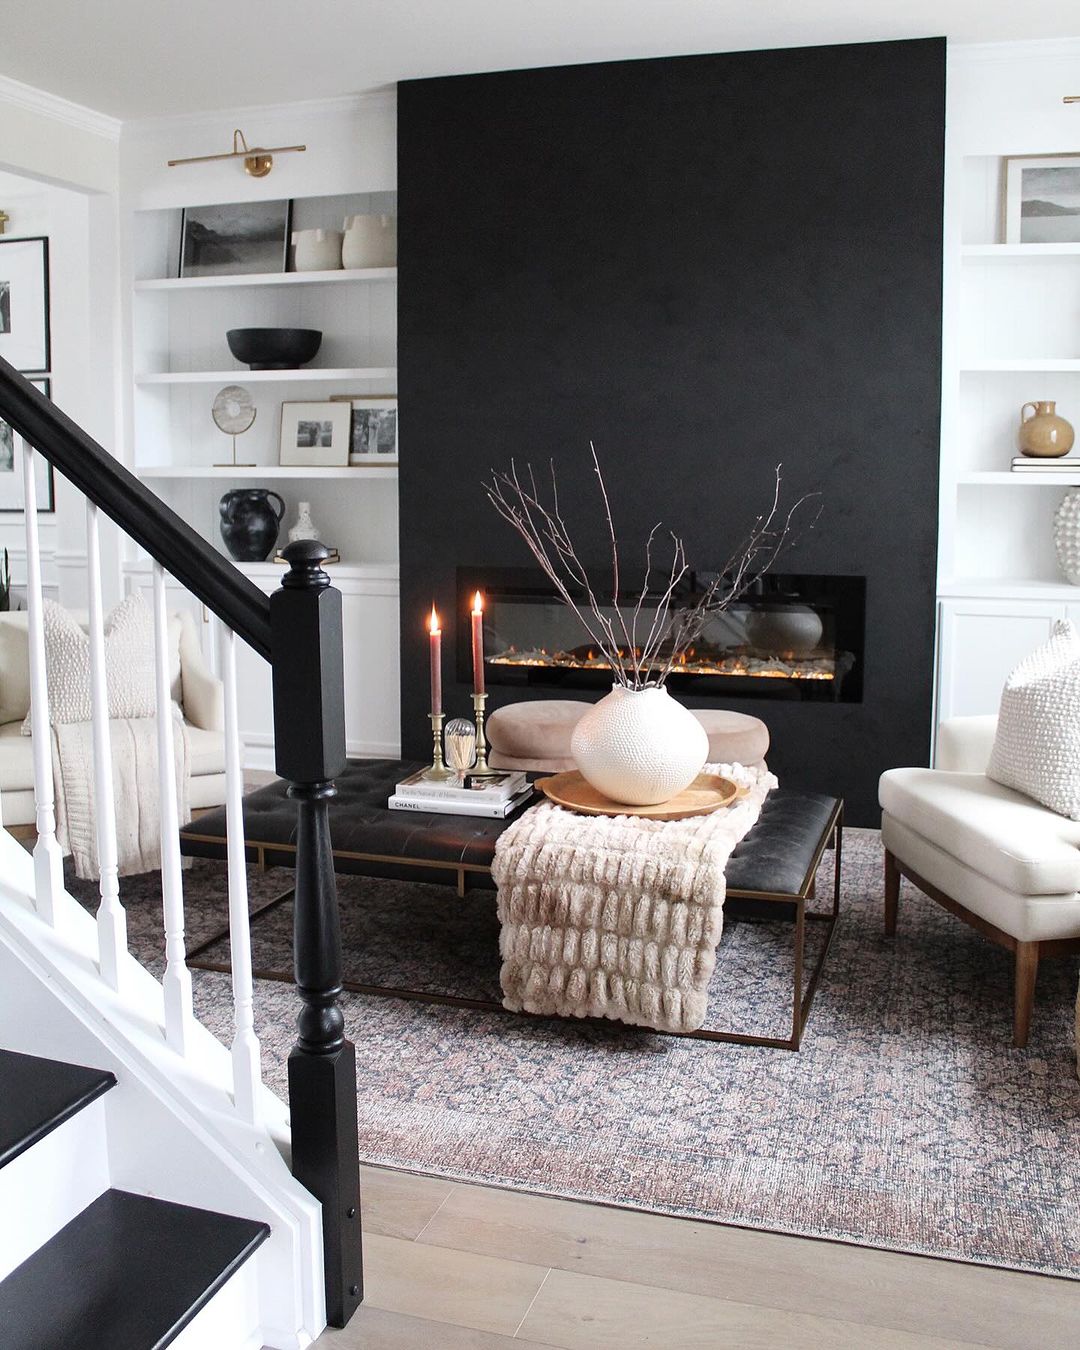 Monochromatic Modernity with Boho Touches